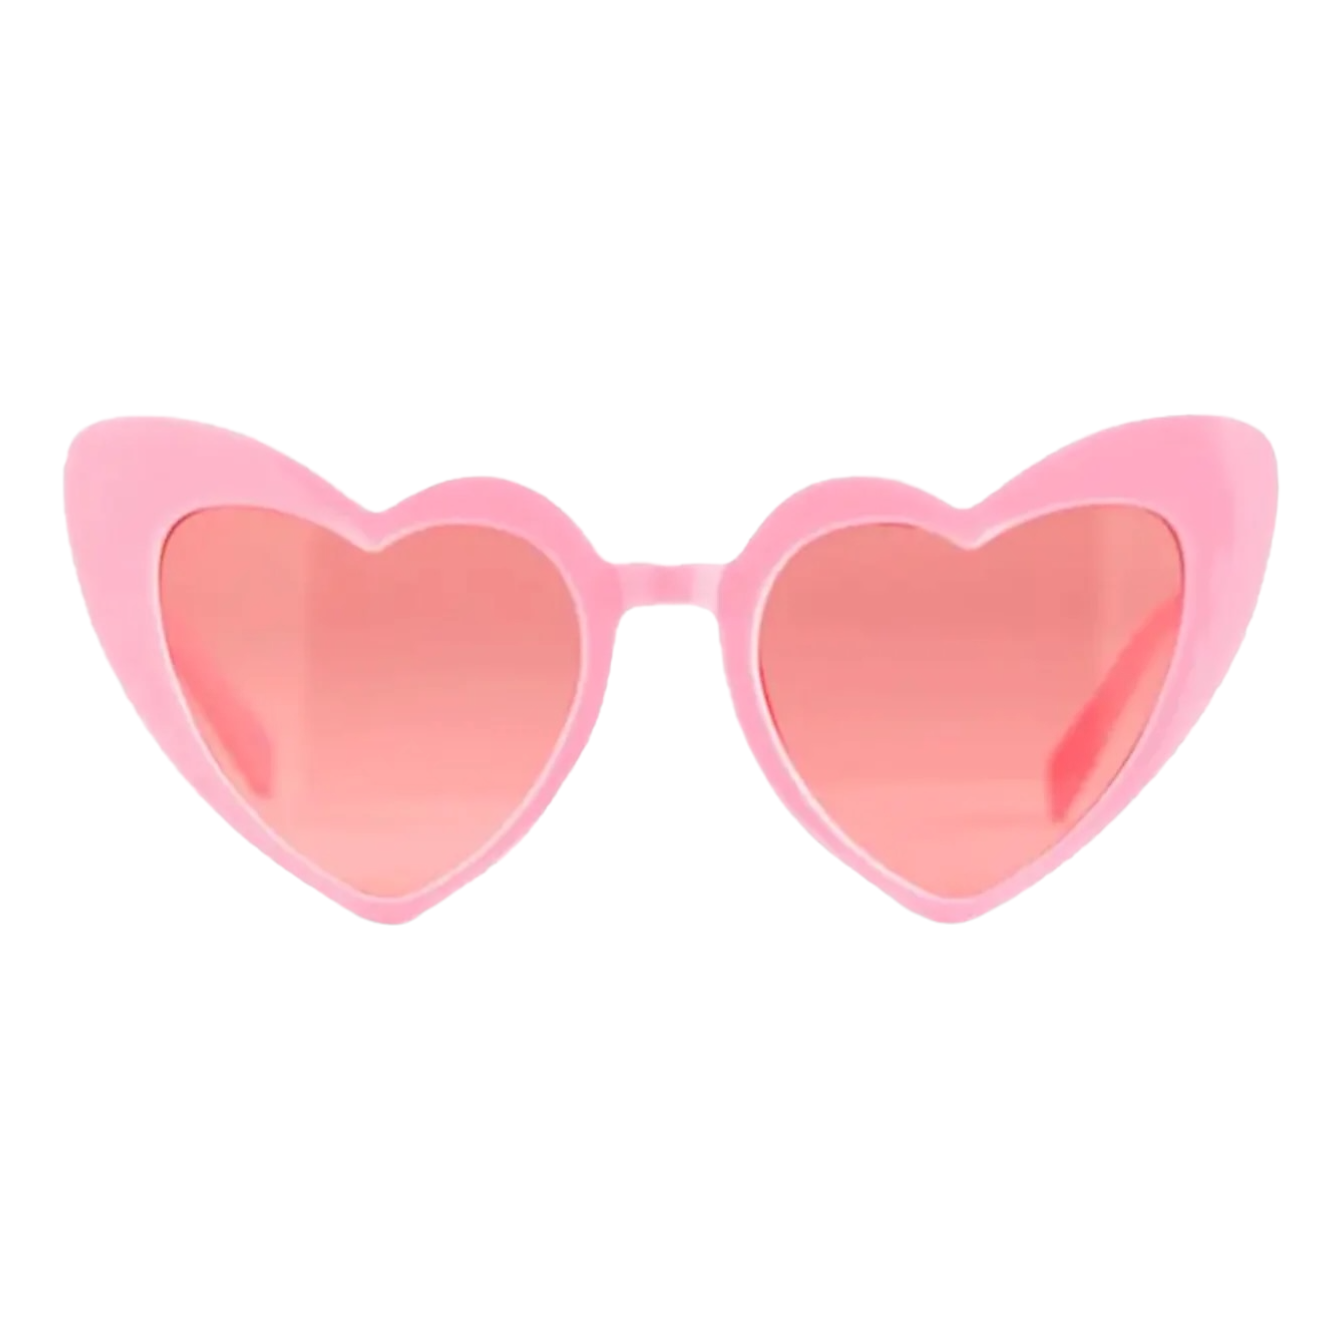 Pink Heart Eyes Party Sunglasses by Weddingstar Inc.